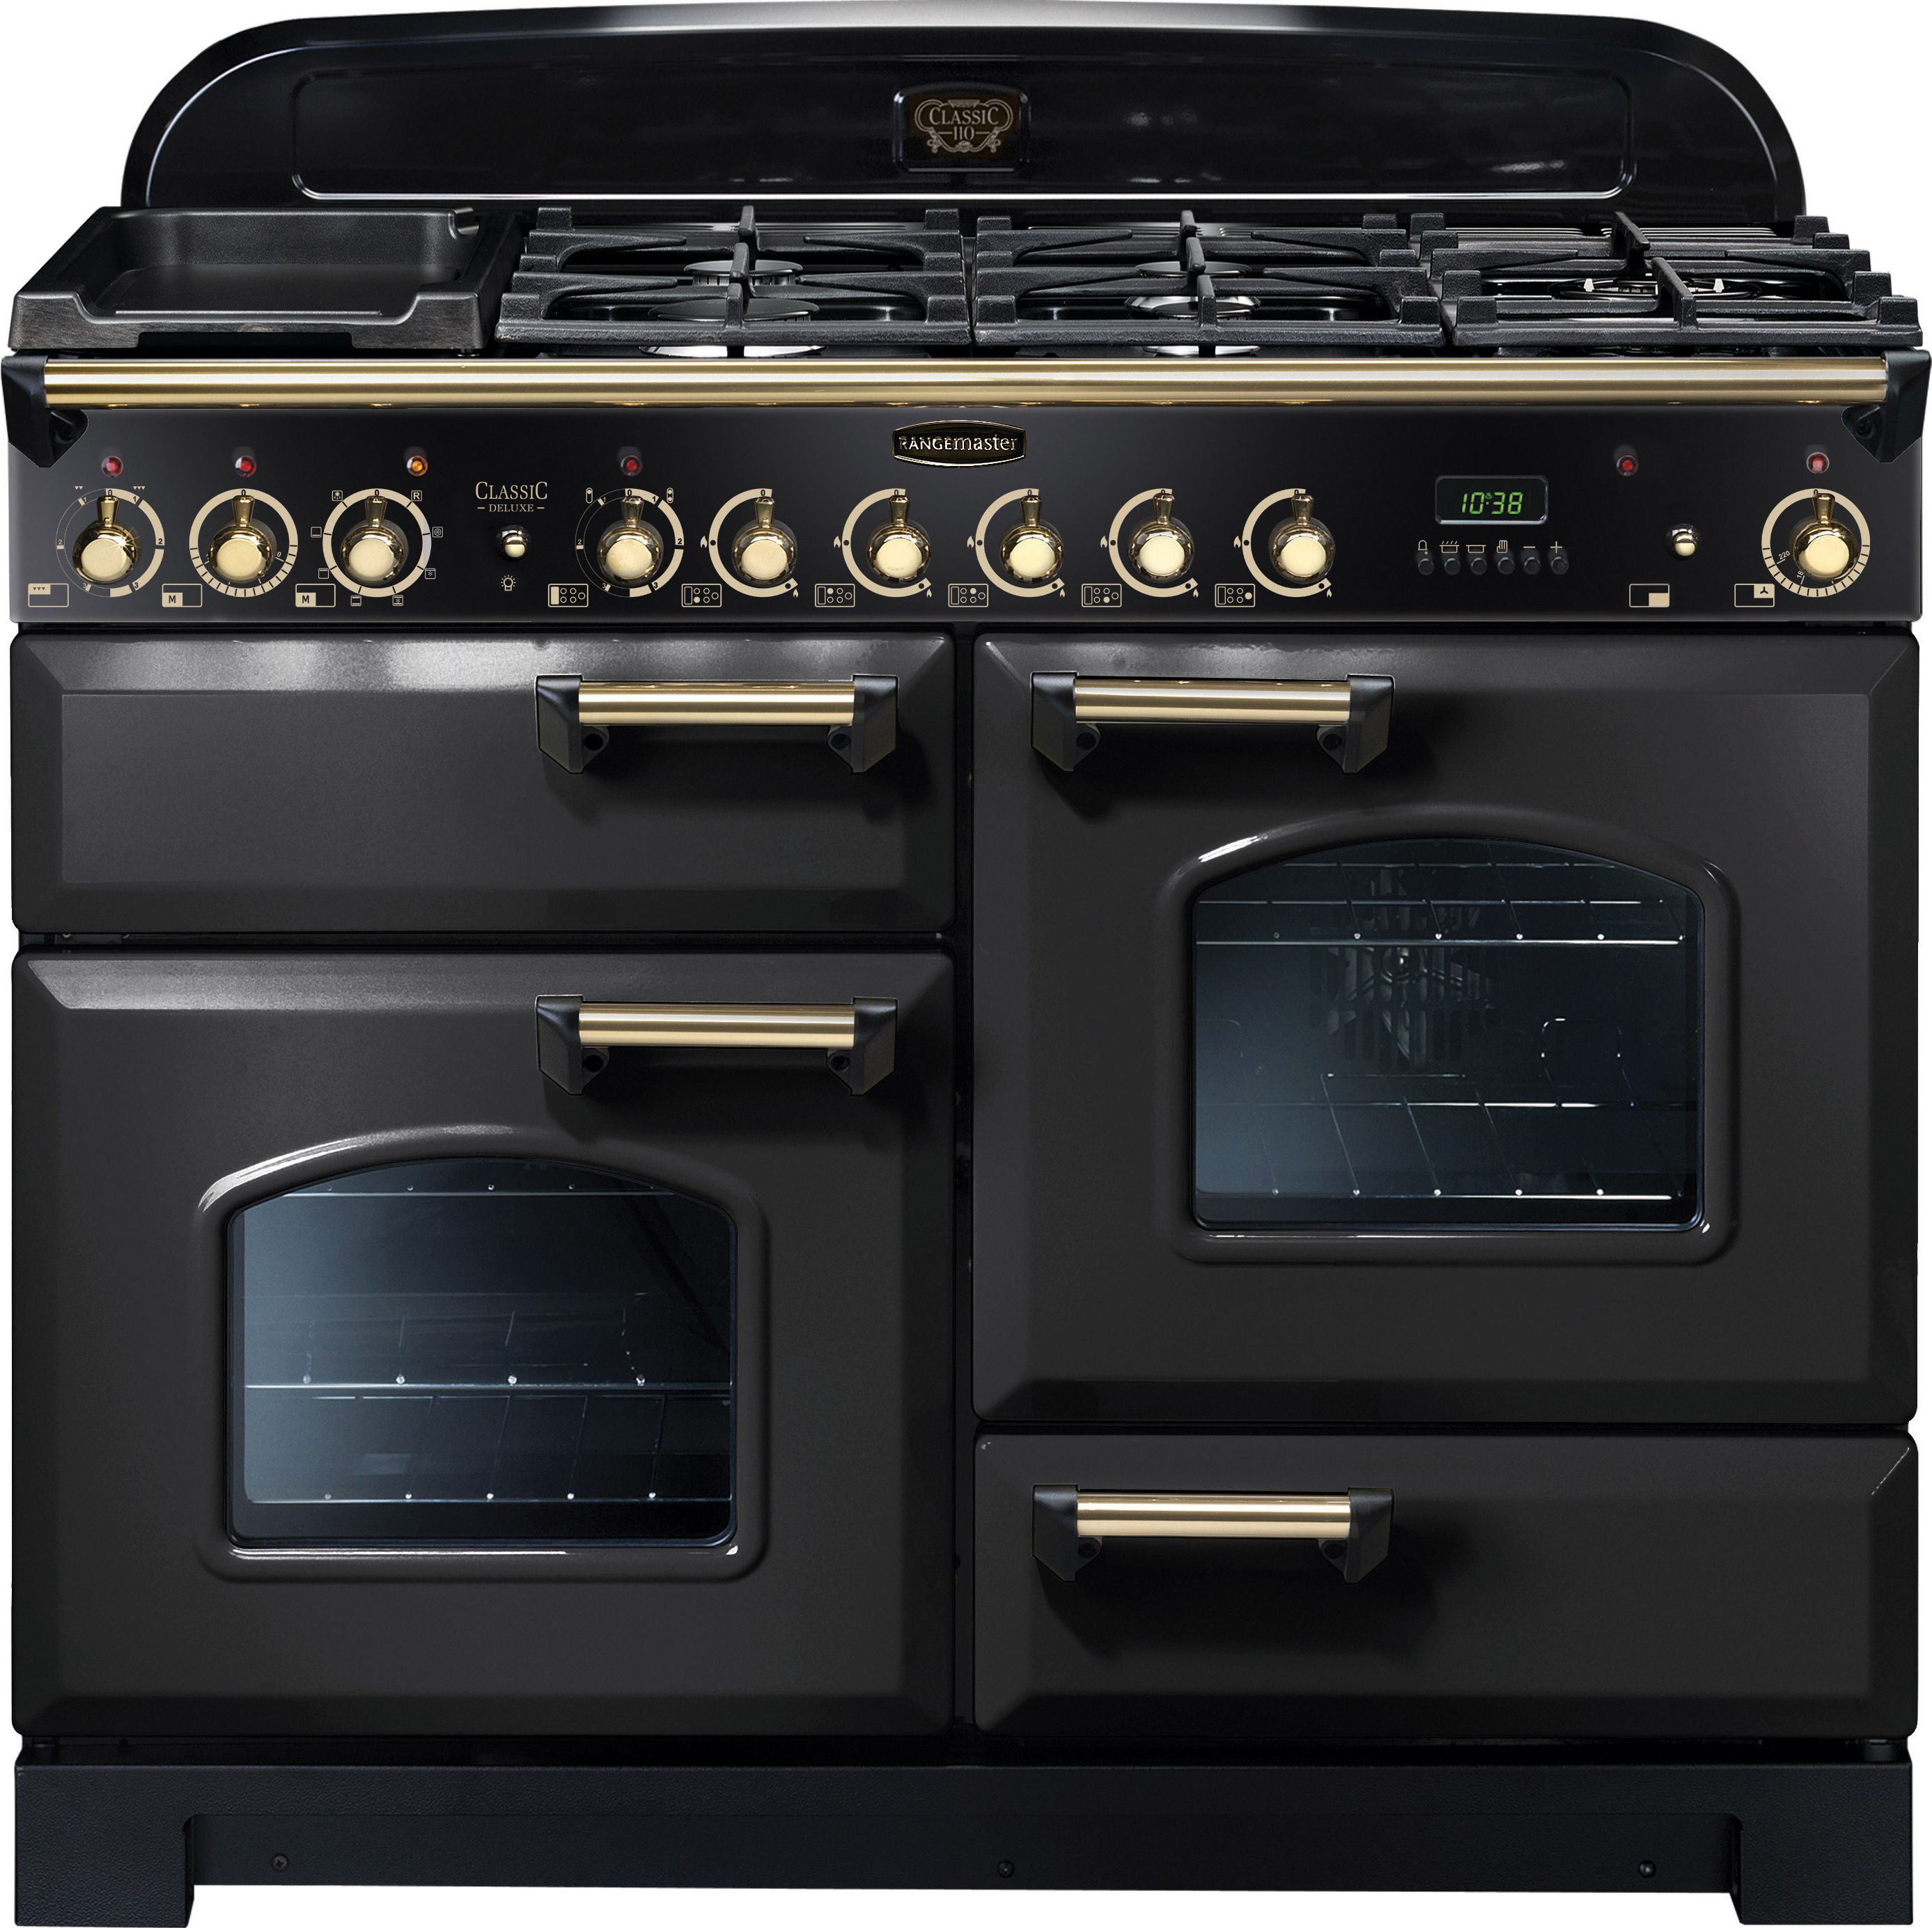 Rangemaster Classic Deluxe CDL110DFFCB/B 110cm Dual Fuel Range Cooker - Charcoal Black / Brass - A/A Rated, Black